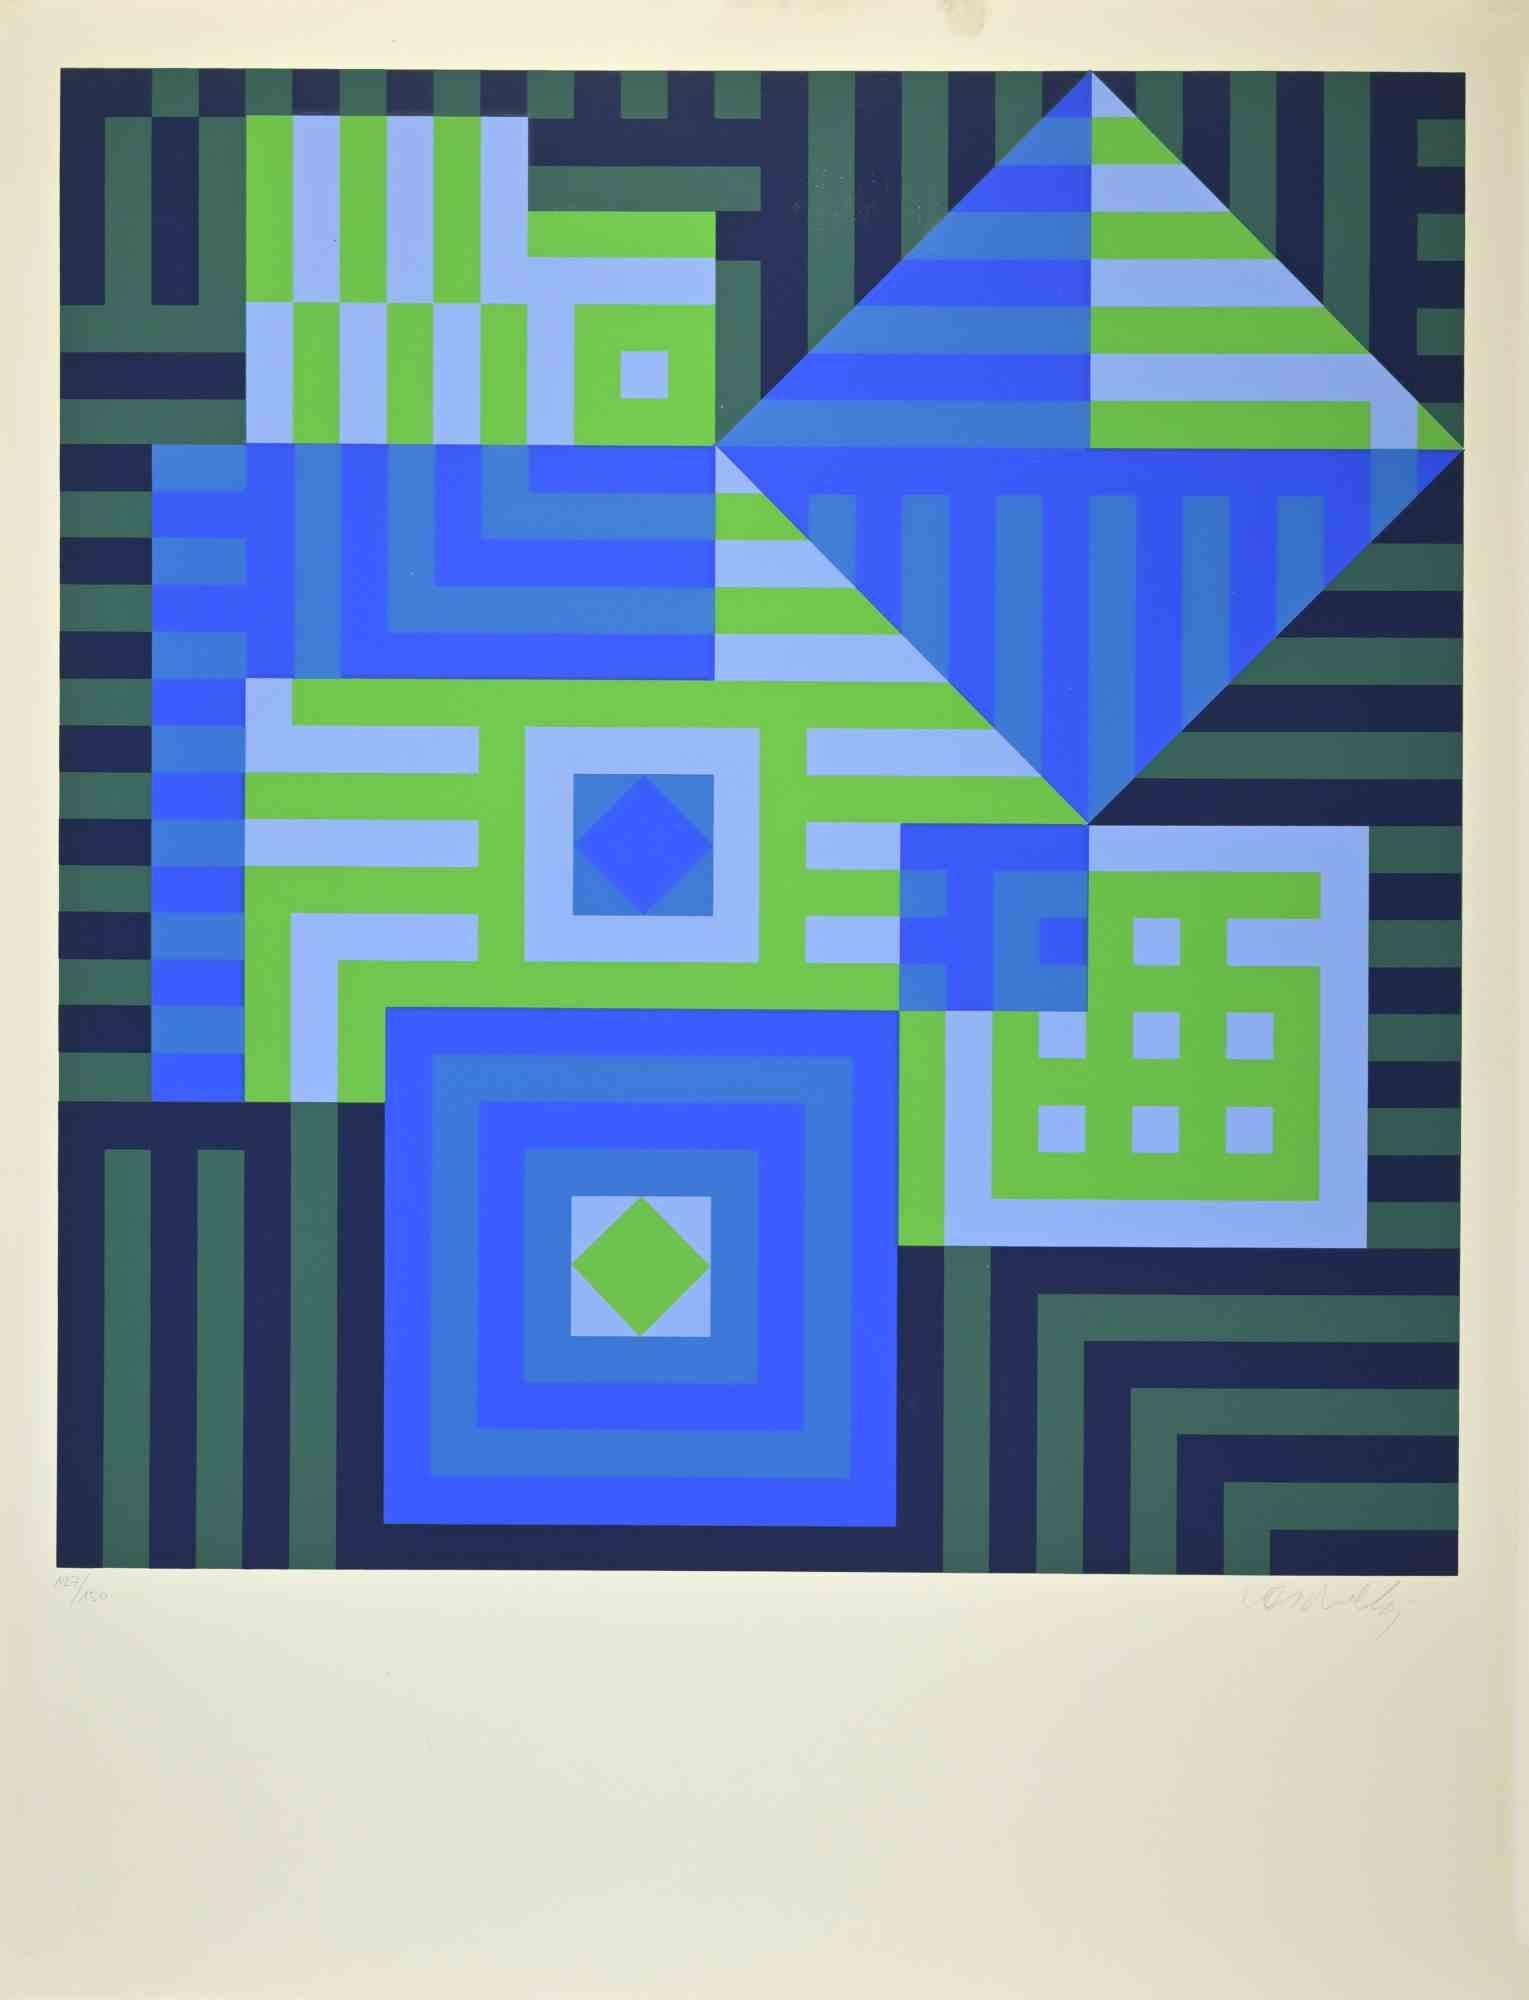 Victor Vasarely Abstract Print - Abstract Composition - Screen Print by V. Vasarely - 1980s